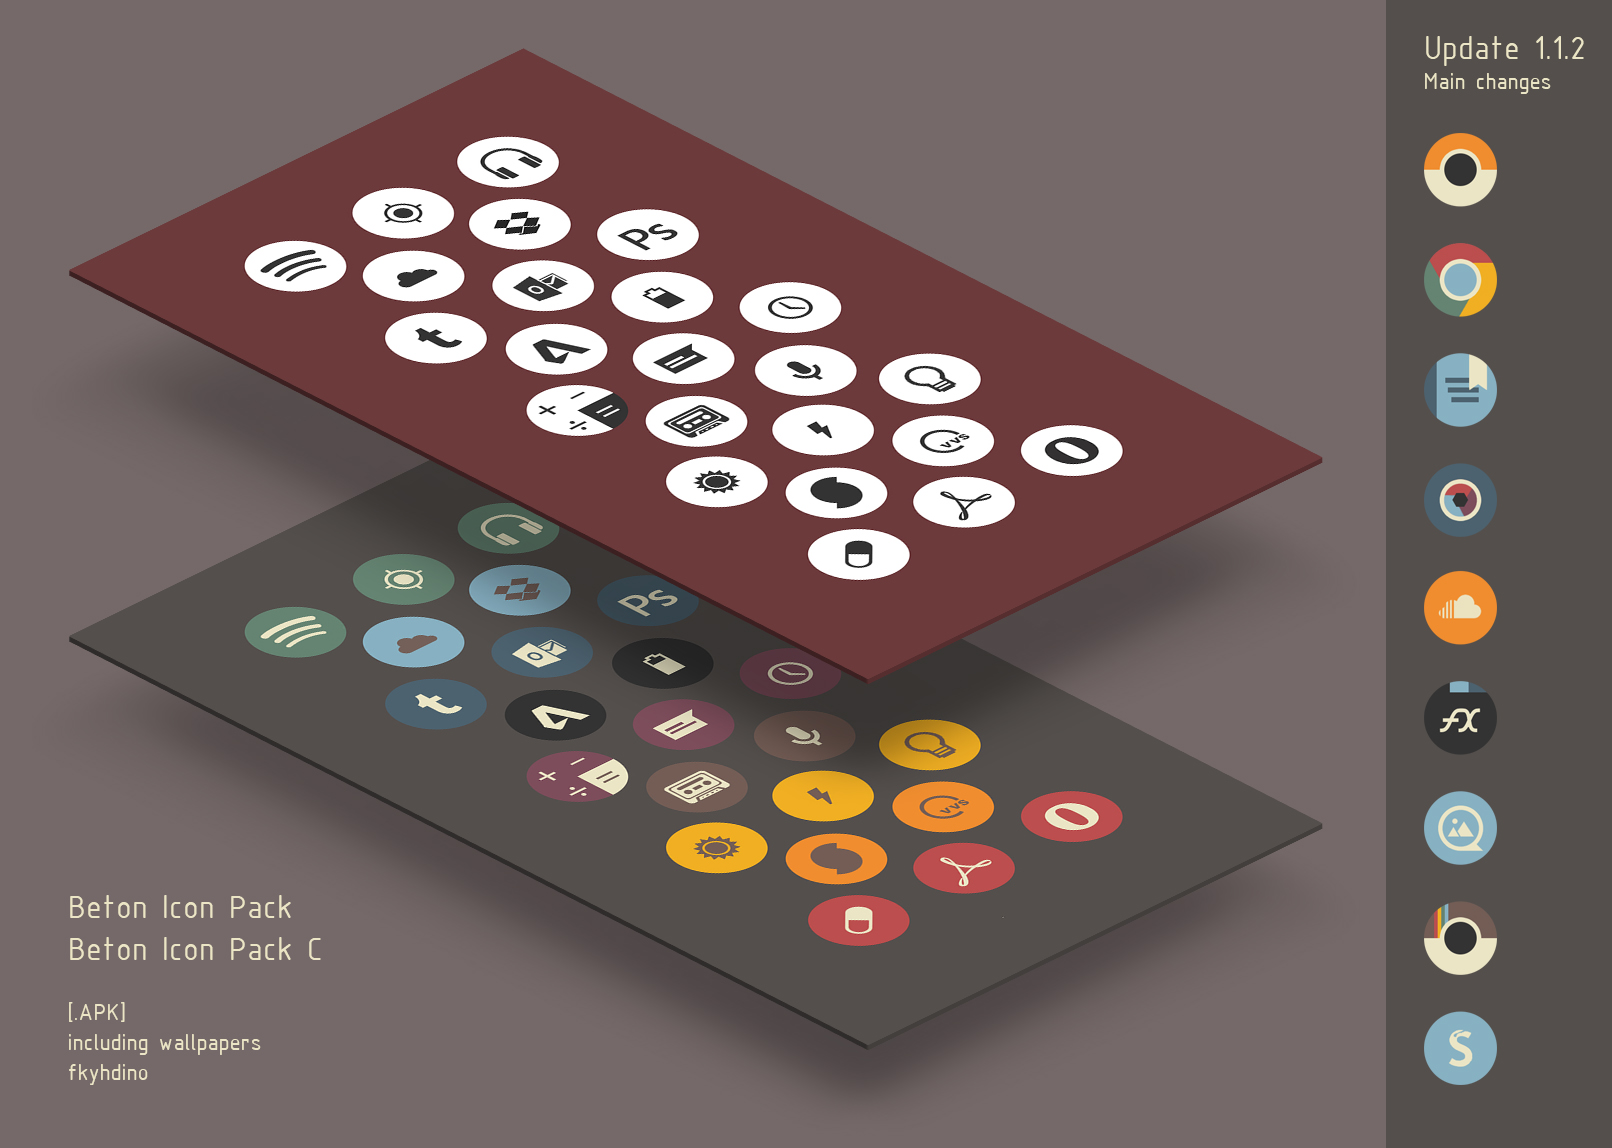 Icon Packs On Android Users DeviantArt